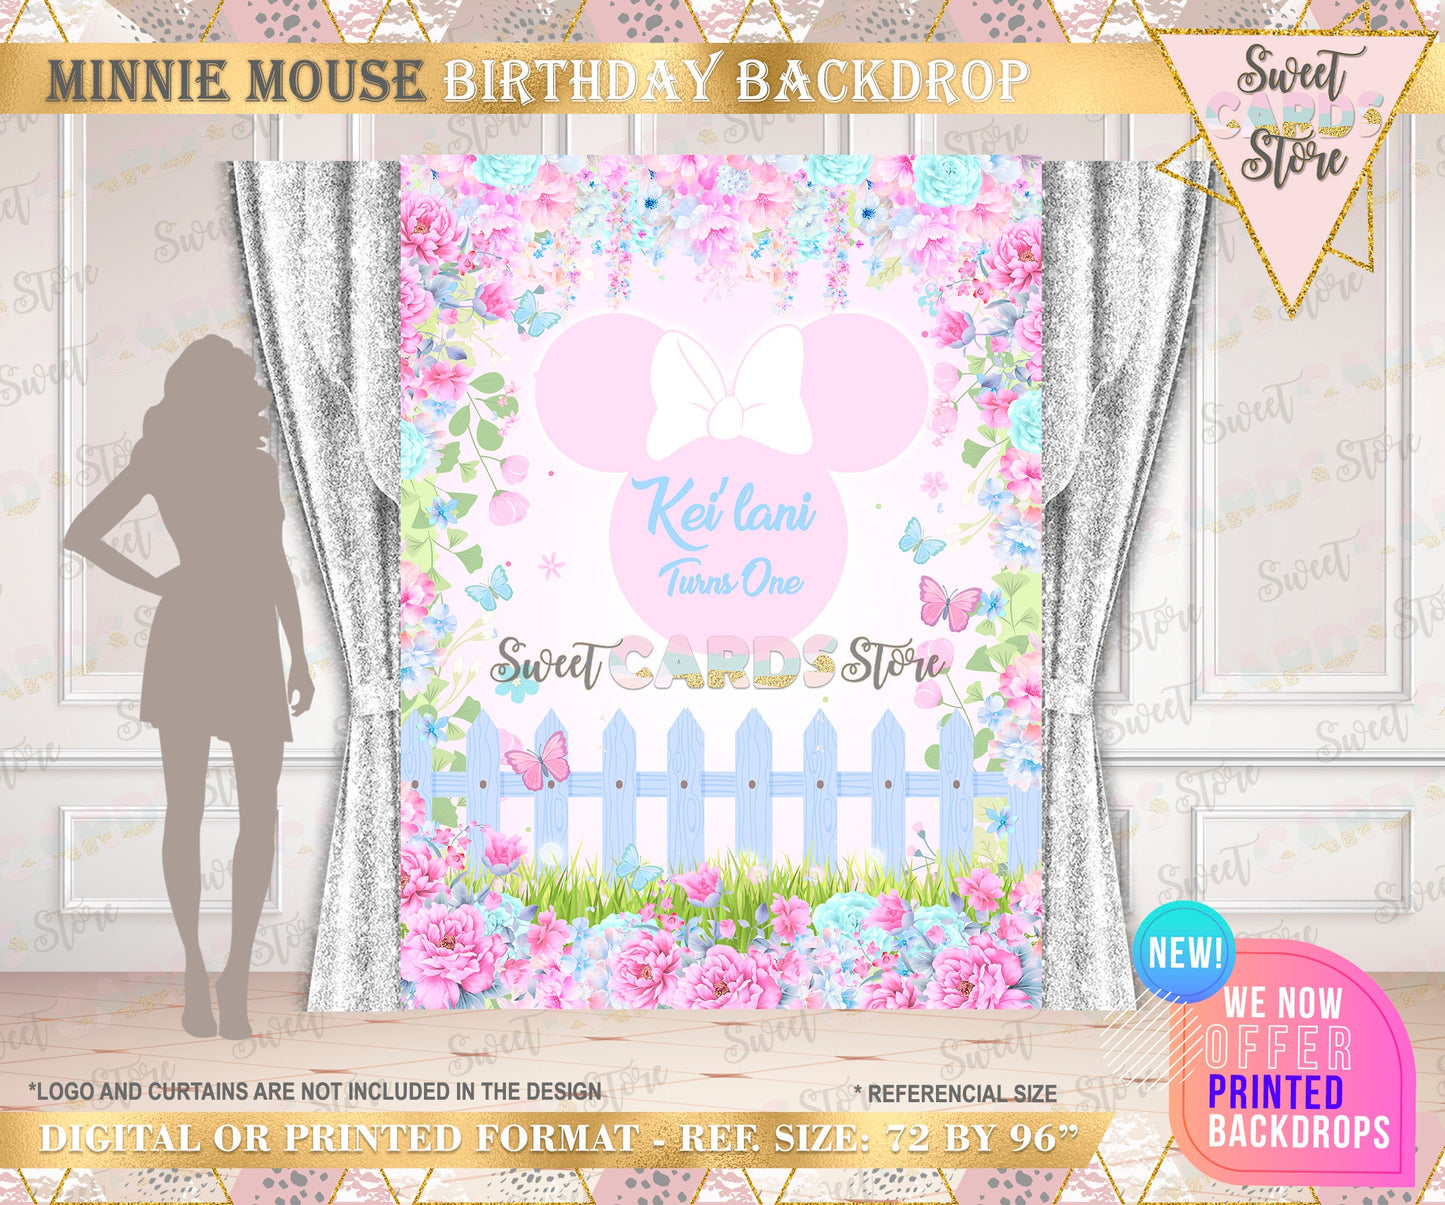 Minnie mouse party backdrop, minnie floral baby shower backdrop, minnie mouse banner, minnie spring flowers baby shower backdrop decor